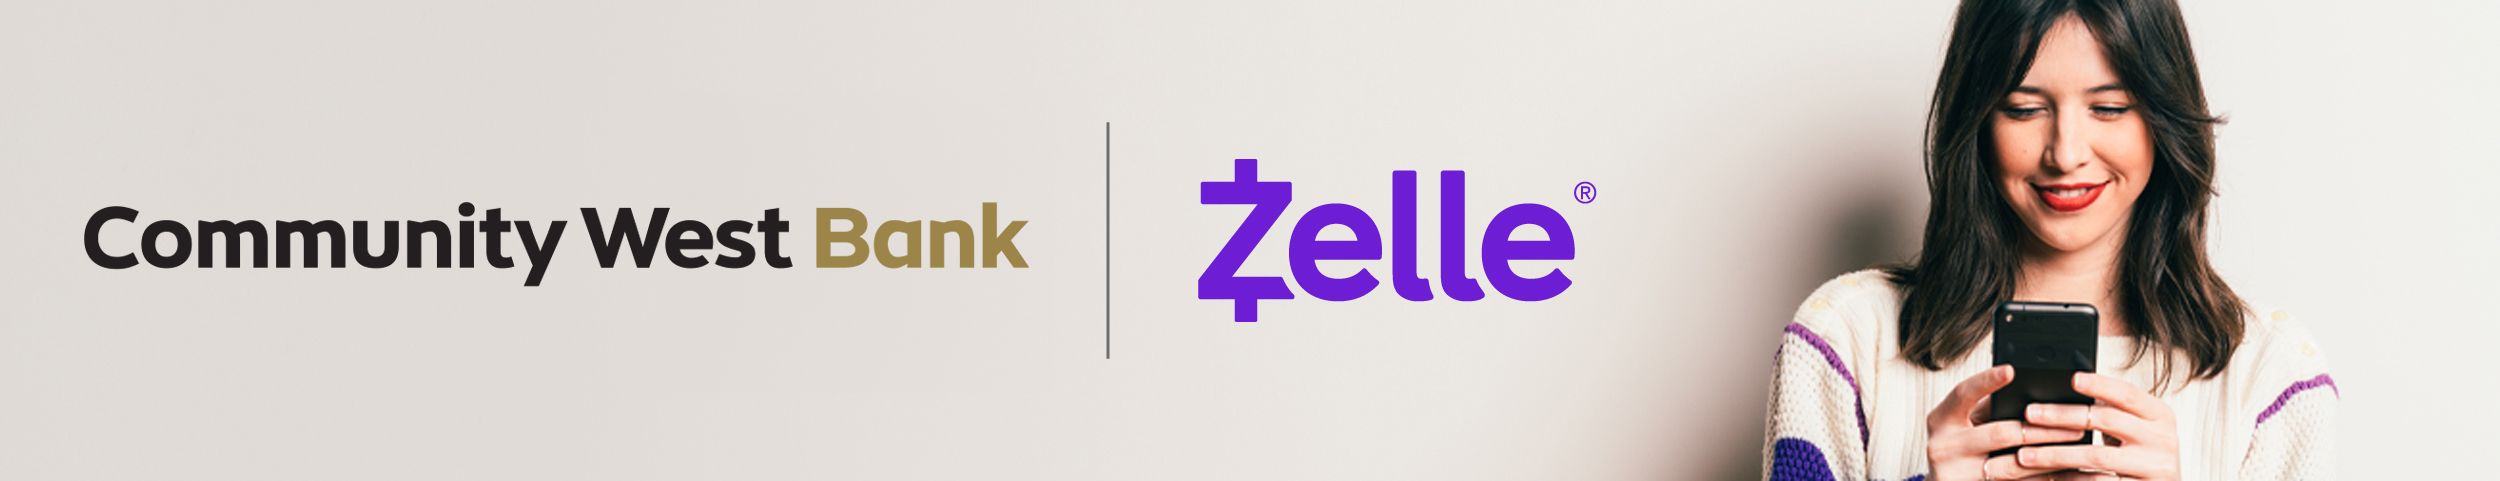 Community West Bank and Zelle